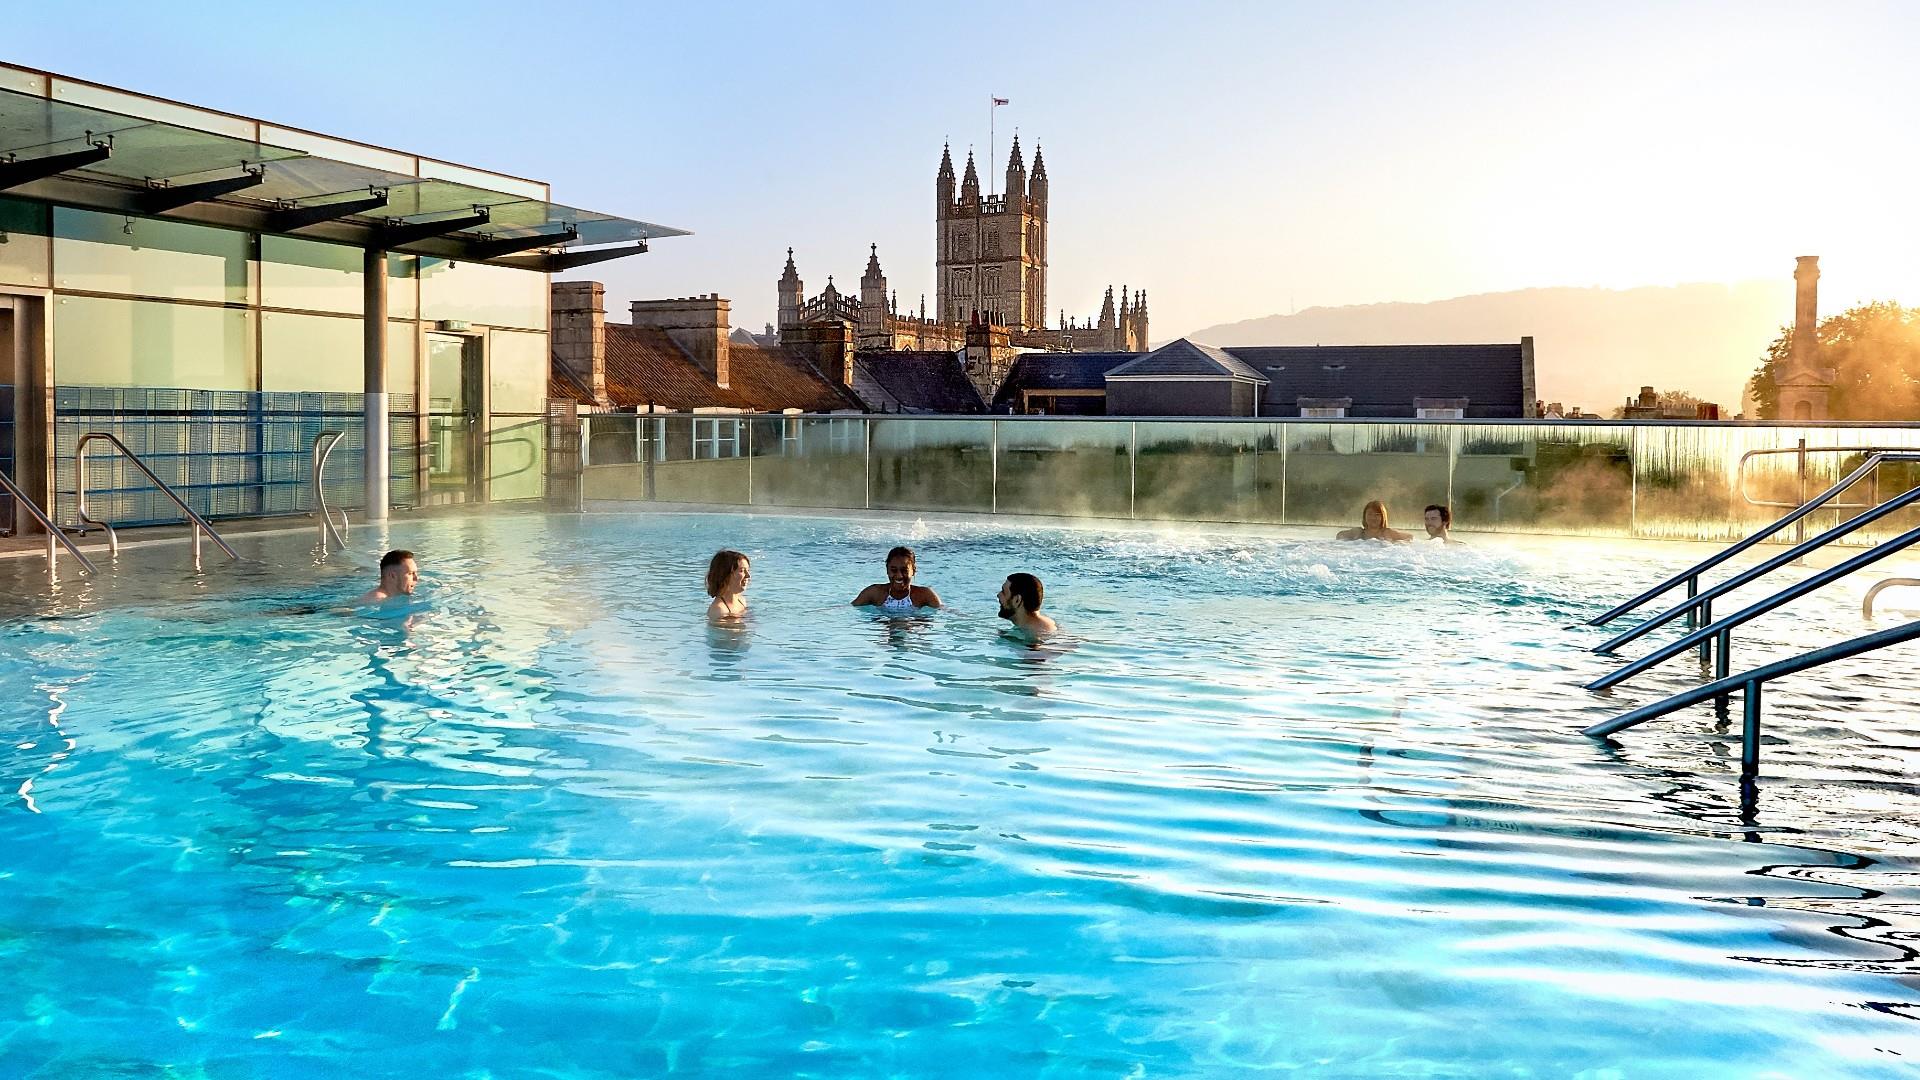 Thermae Bath Spa rooftop pool with bright sky and people